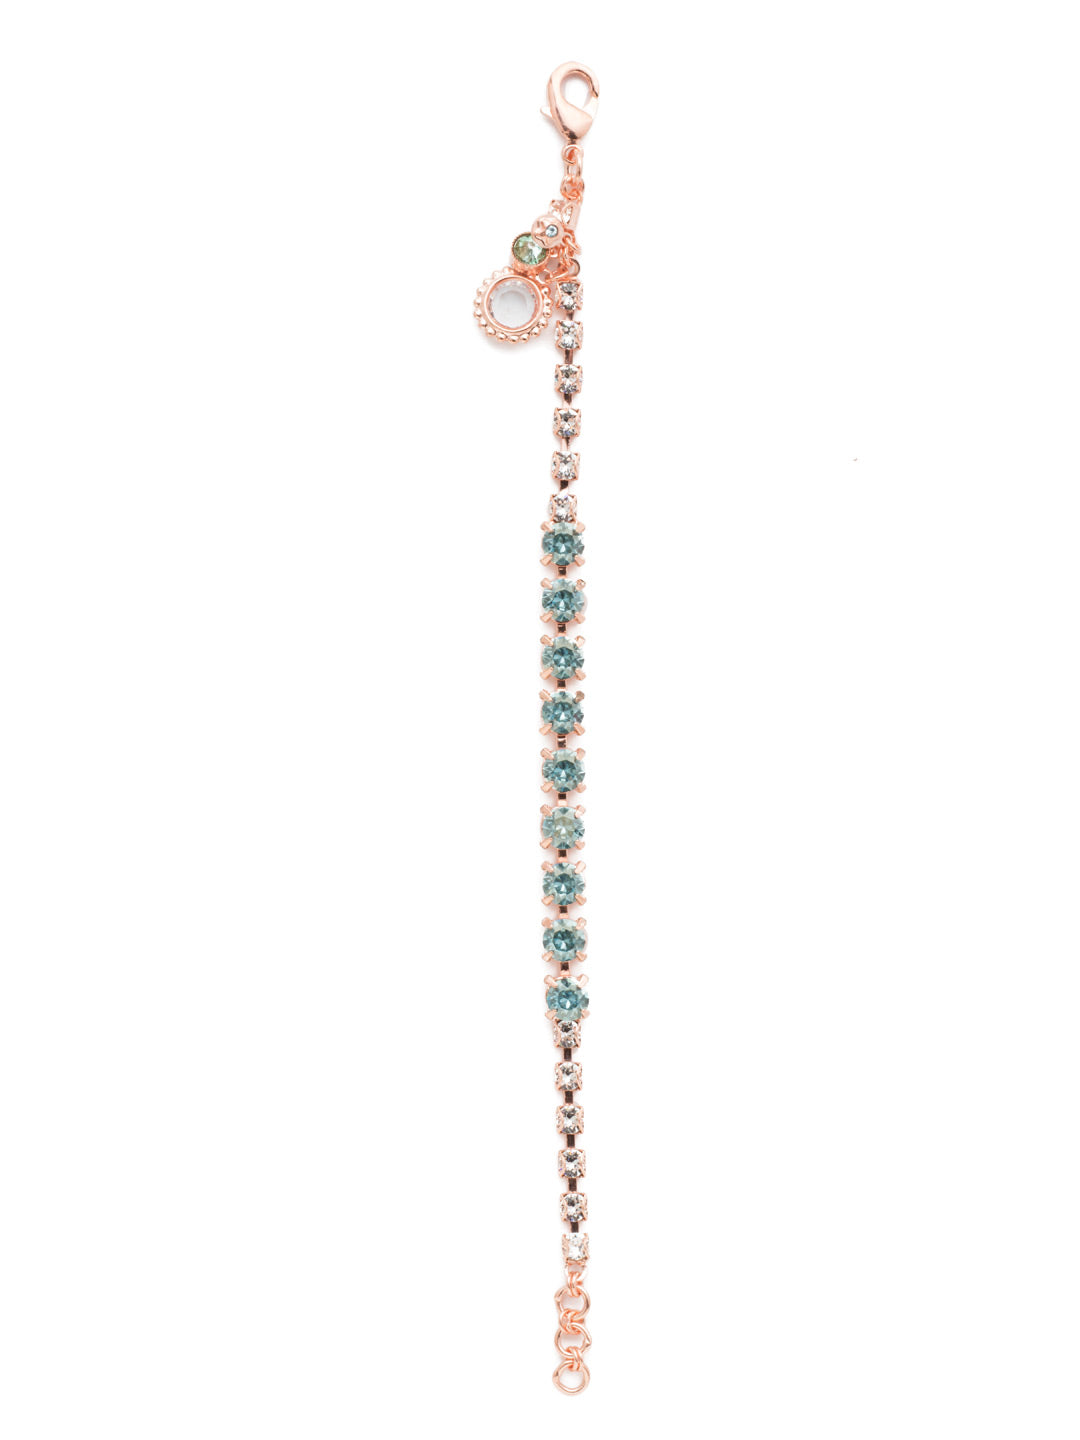 Audriana Tennis Bracelet - BET37RGCAZ - There's nothing more stunning than simple, sparkling, circular crystal stones. The Audriana Tennis Bracelet is a testament to that fact, and a classic. From Sorrelli's Crystal Azure collection in our Rose Gold-tone finish.